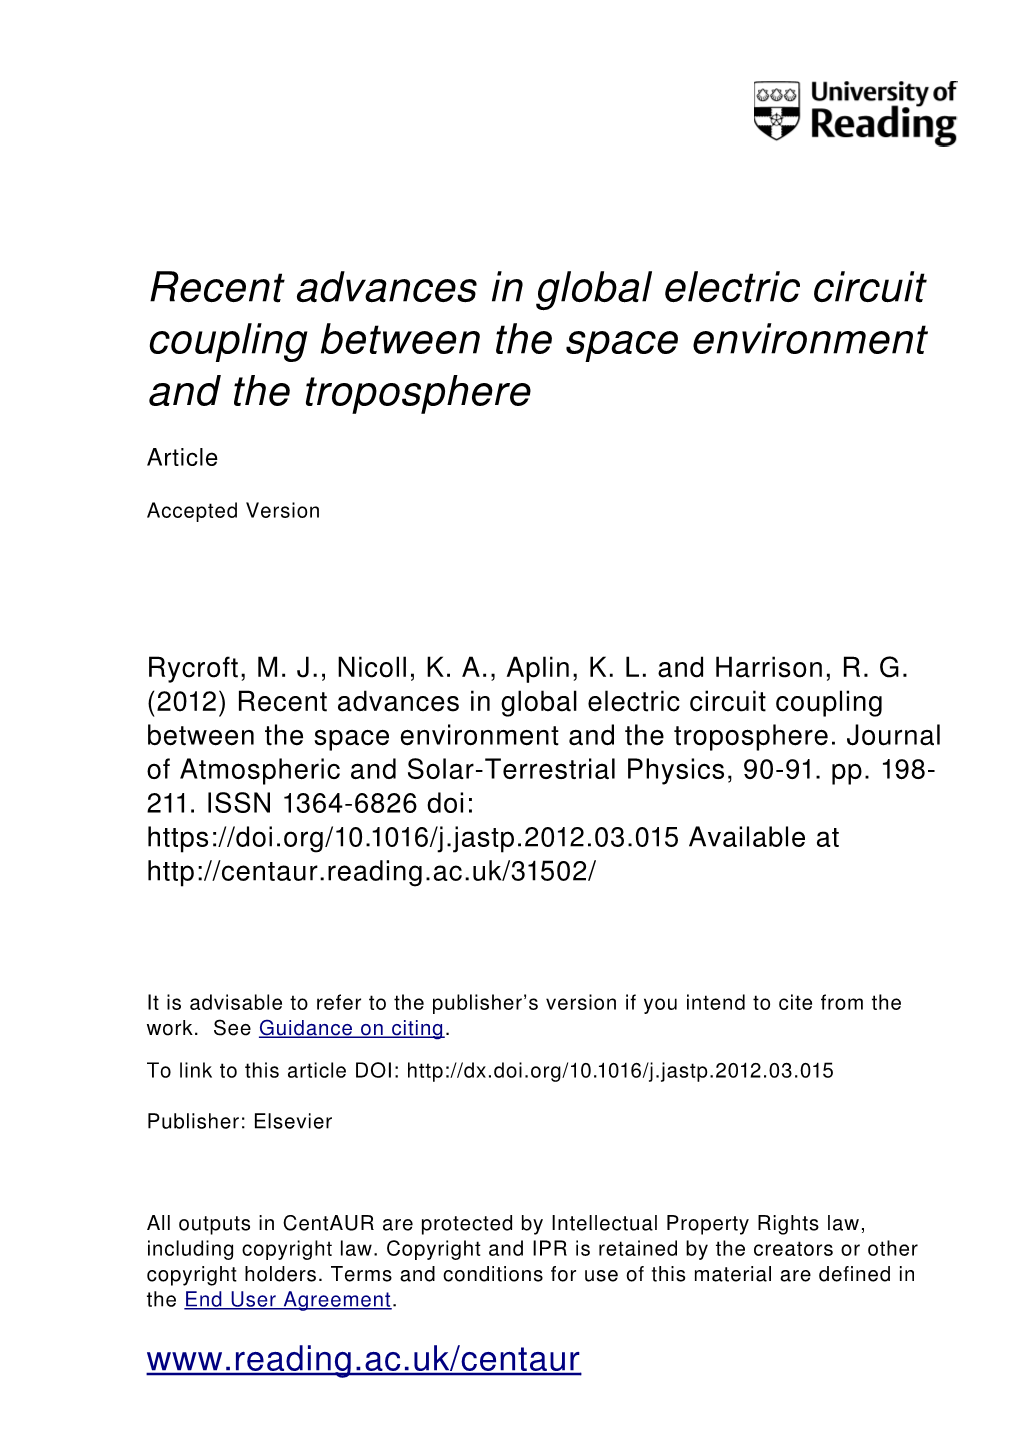 Recent Advances in Global Electric Circuit Coupling Between the Space Environment and the Troposphere